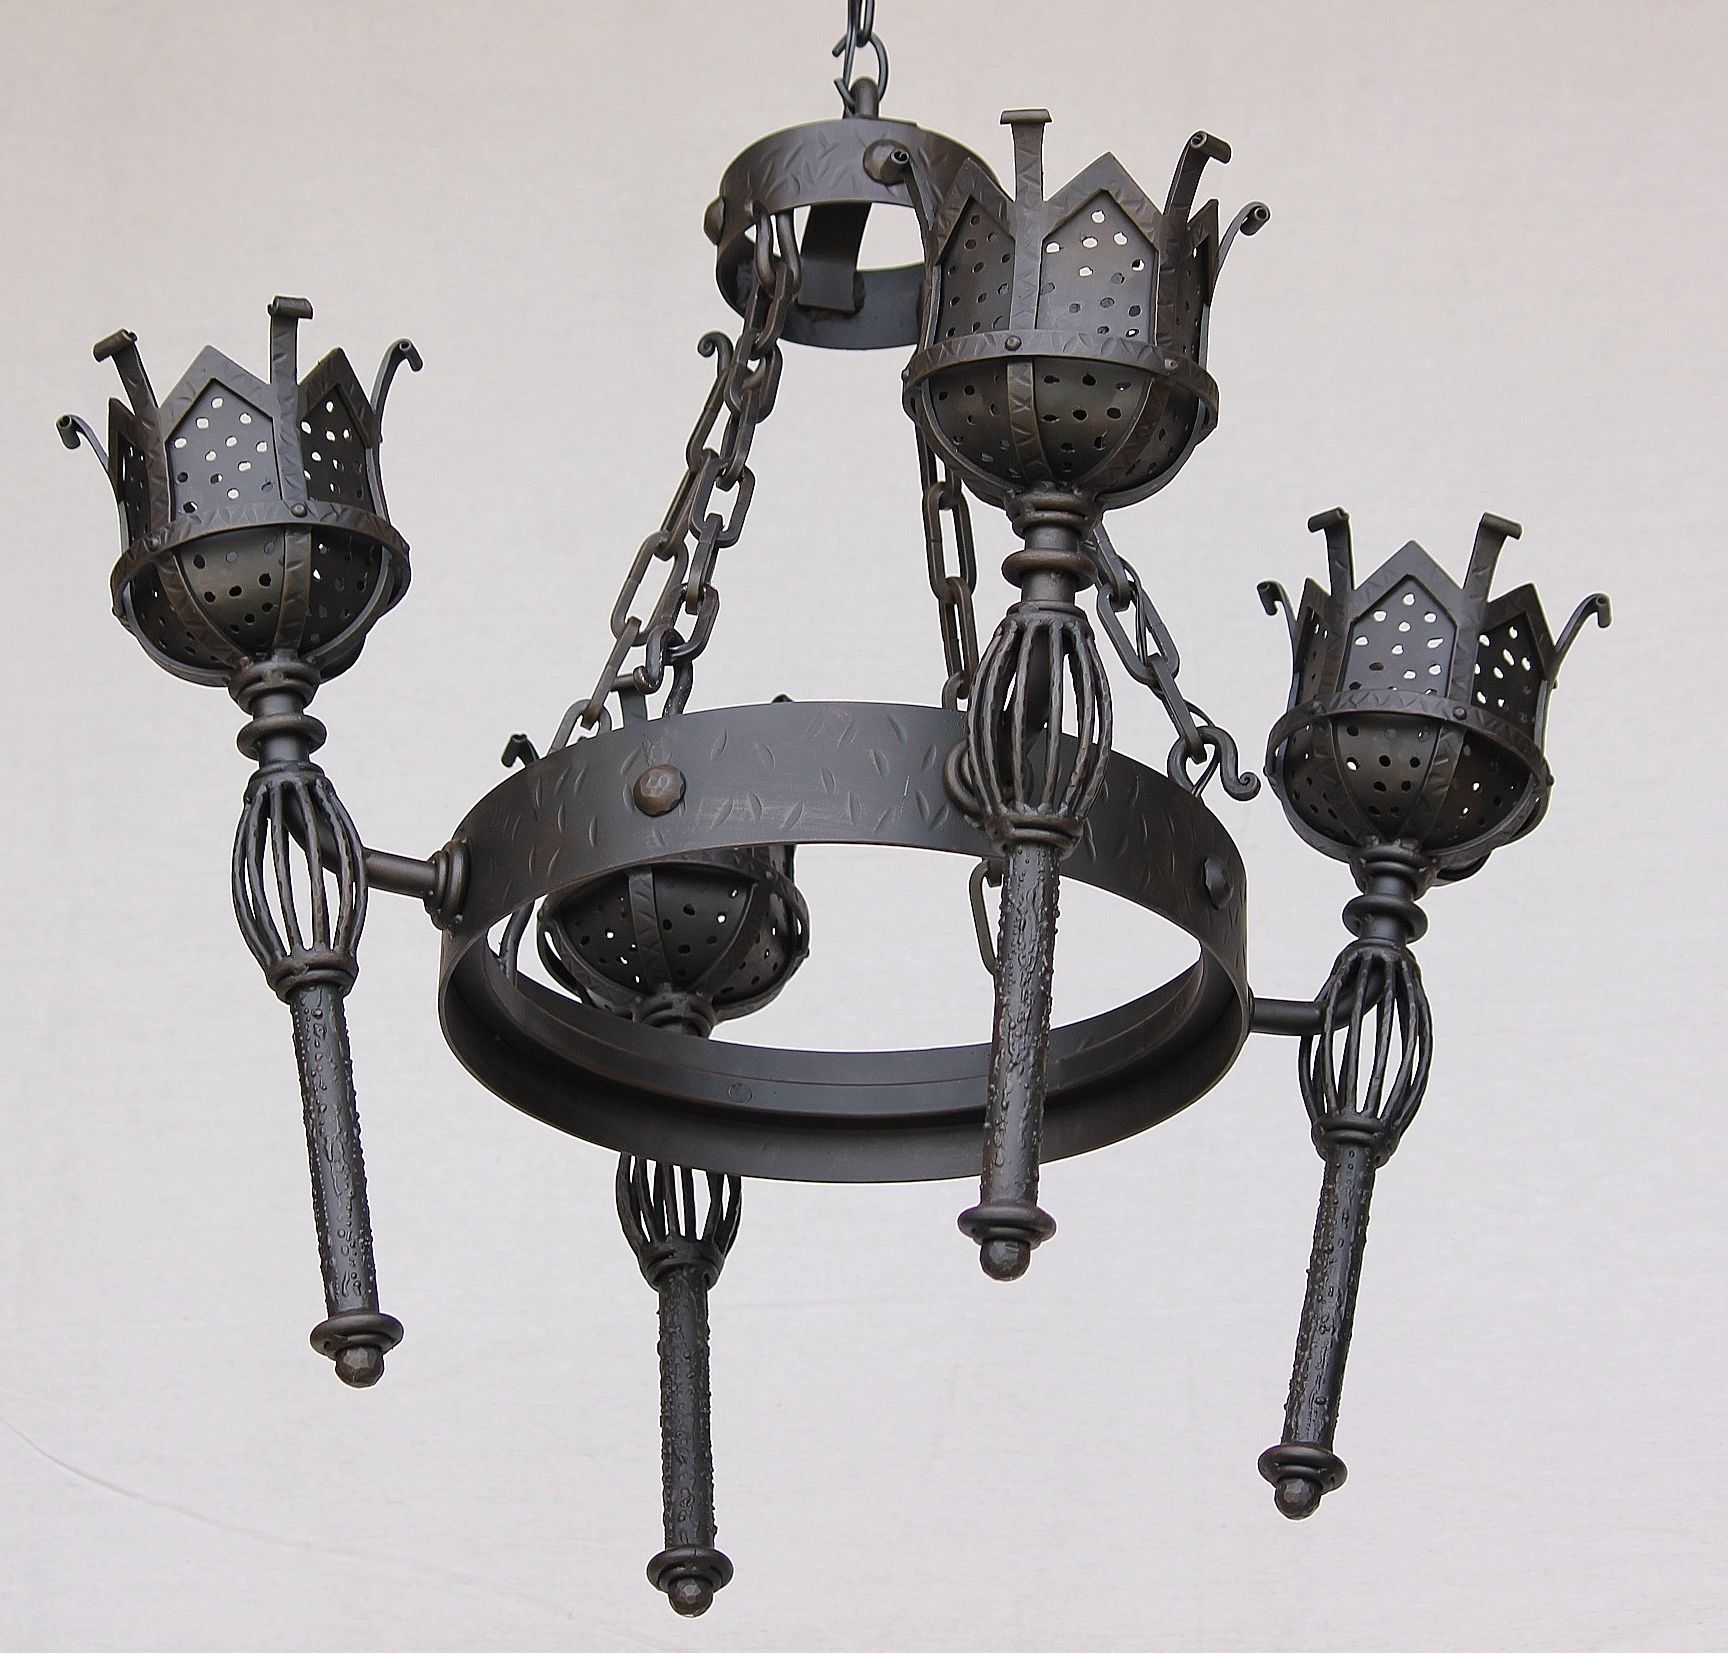 Lights of Tuscany 17154 Gothic Torch Chandelier